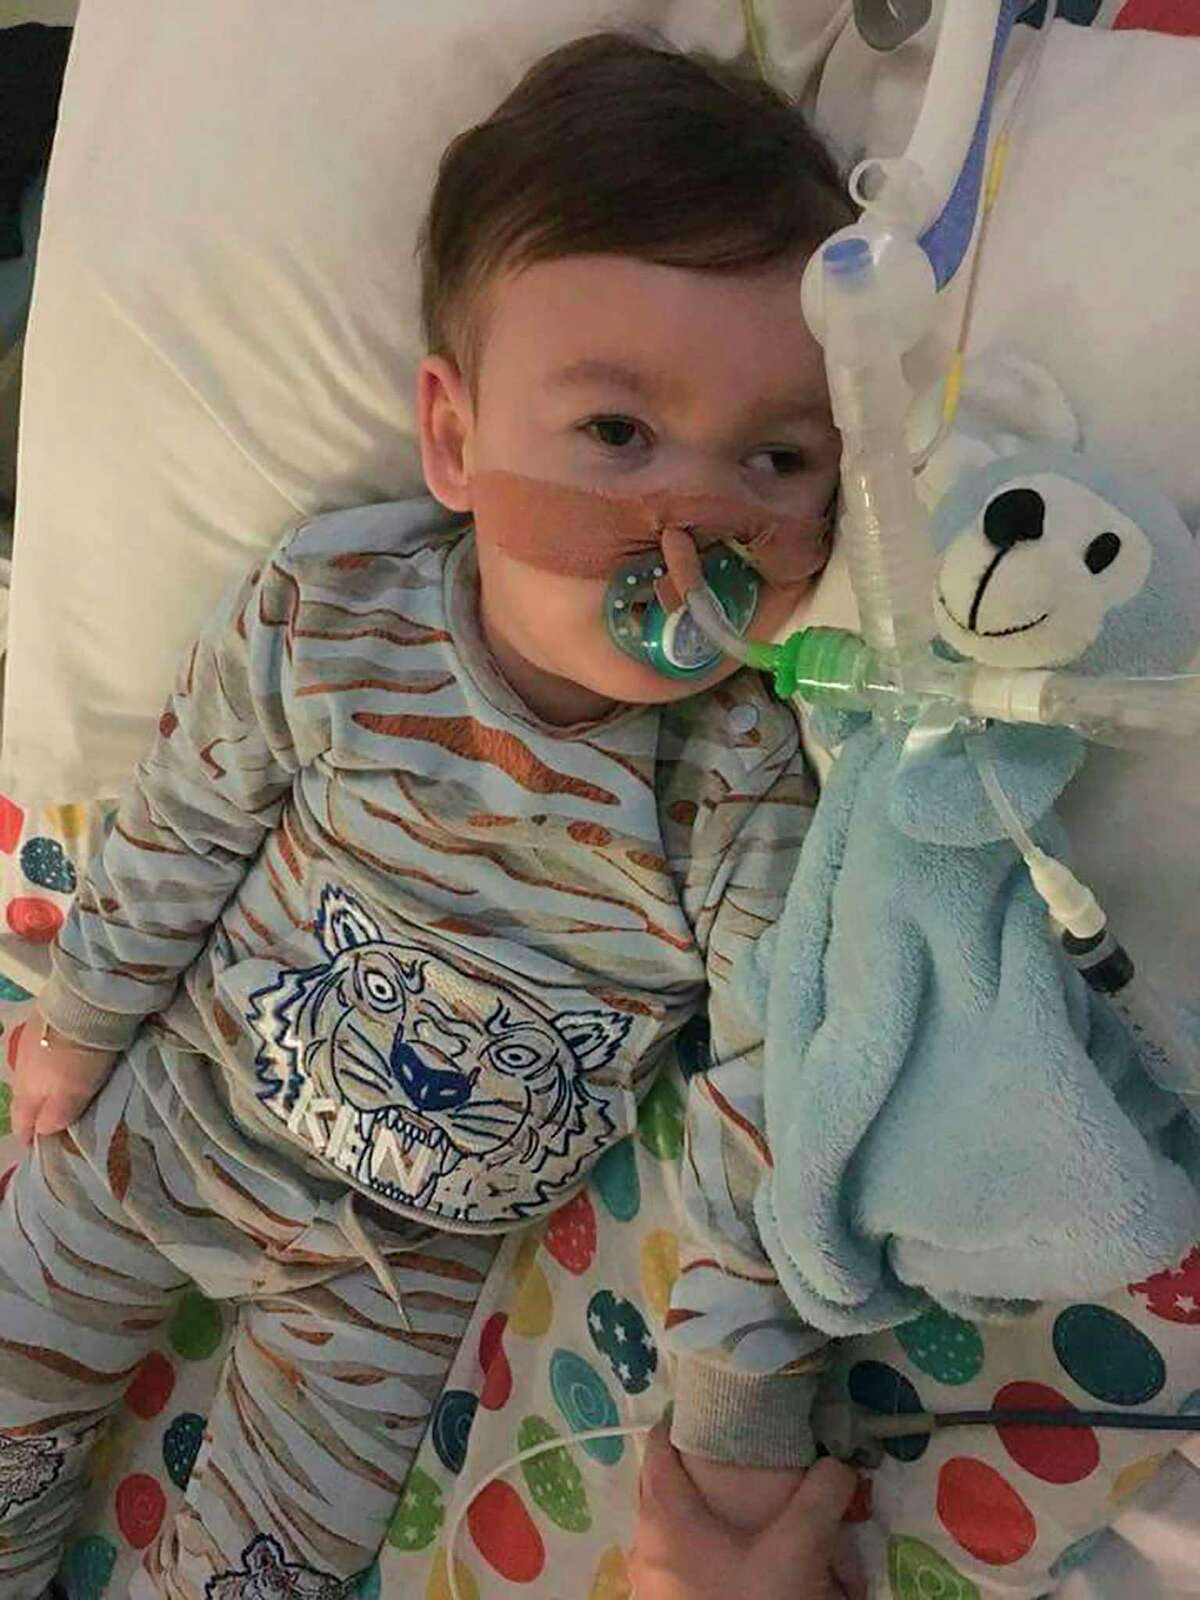 (FILES) In this file photo of April 05, 2018 a handout picture released by Action4Alfie operating the facebook group alfiesarmy and the Save Alfie Evans website on April 5, 2018 shows seriously ill British toddler Alfie Evans at Alder Hey Children's Hospital in Liverpool. The parents of terminally ill British boy Alfie Evans lost their court appeal on April 25, 2018 against a ruling preventing them from taking their son, who suffers from a rare neurological disease, to Rome for treatment. / AFP PHOTO / Action4Alfie / Action4Alfie / RESTRICTED TO EDITORIAL USE - MANDATORY CREDIT "AFP PHOTO / ACTION4ALFIE " - NO MARKETING NO ADVERTISING CAMPAIGNS - RESTRICTED TO SUBSCRIPTION USE - DISTRIBUTED AS A SERVICE TO CLIENTS ACTION4ALFIE/AFP/Getty Images